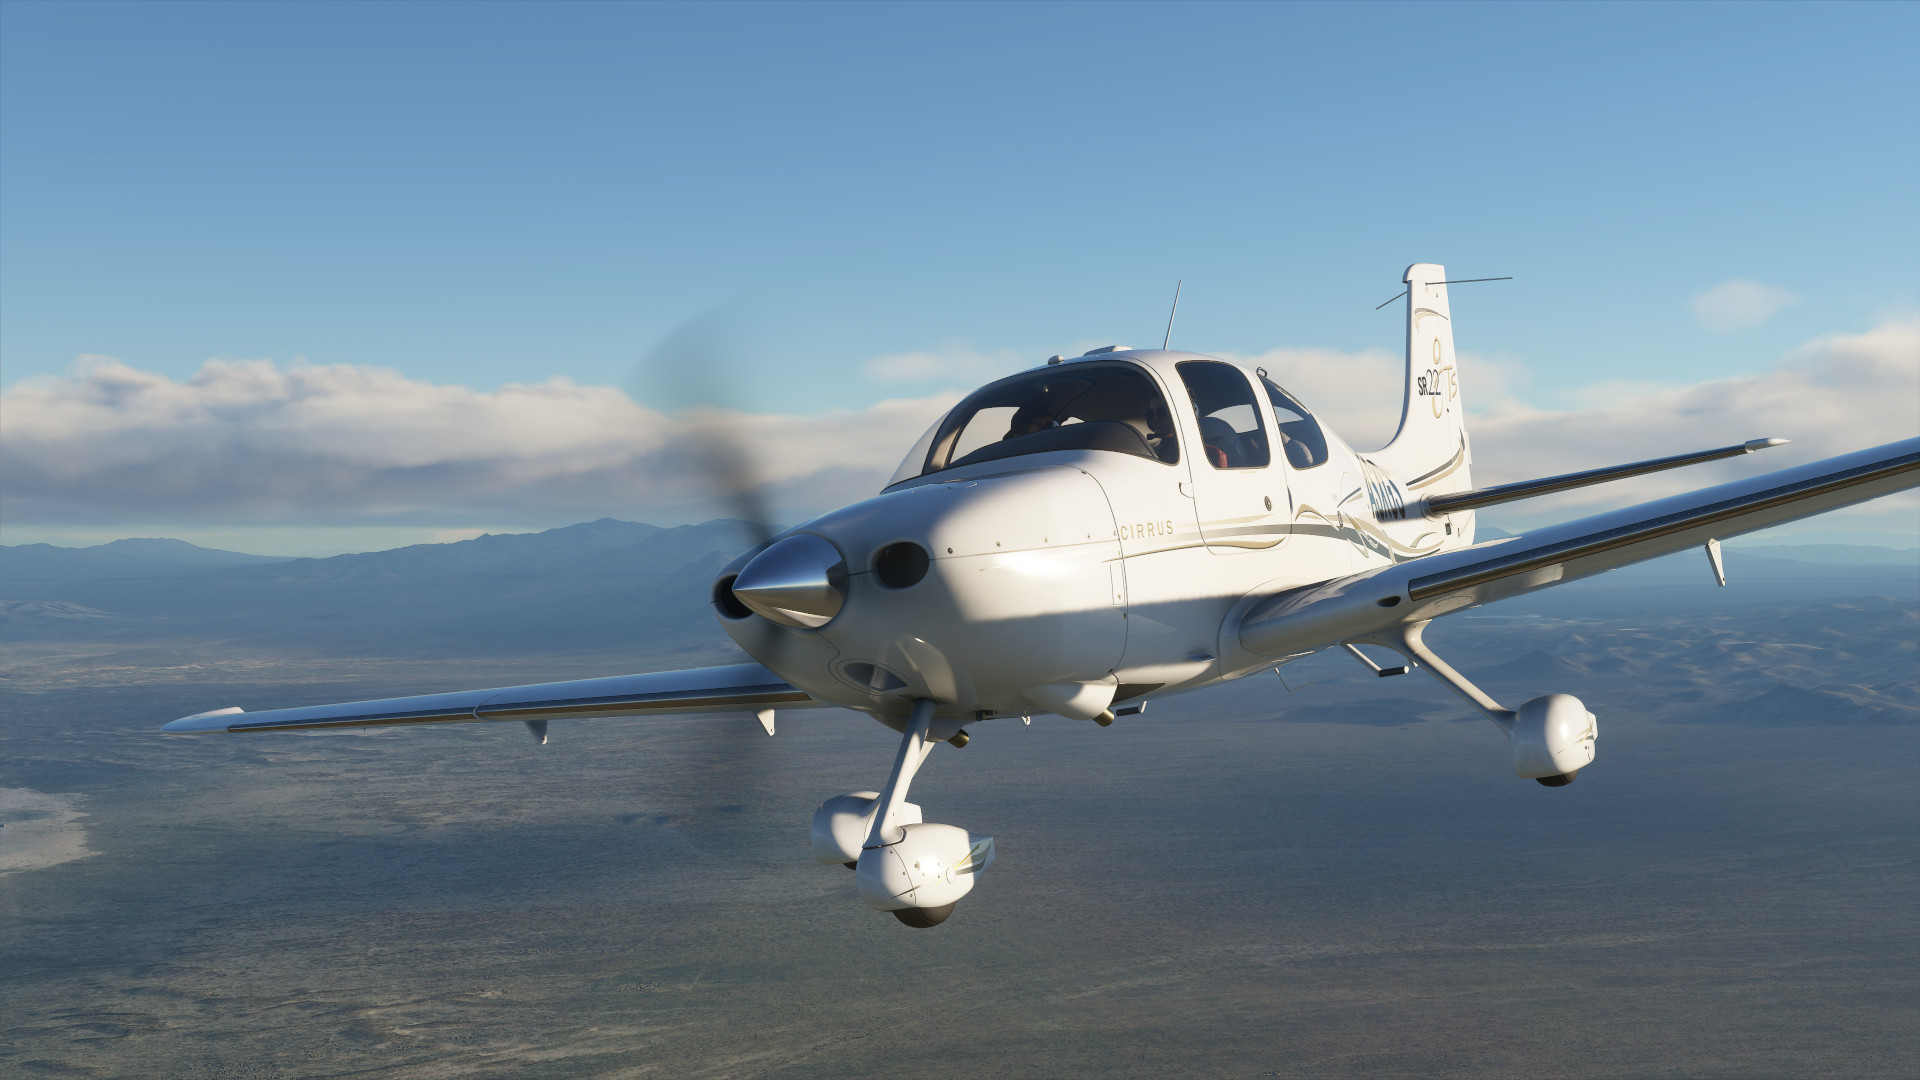 Microsoft Flight Simulator Highlights Asia And The Middle East In Gorgeous New Trailer